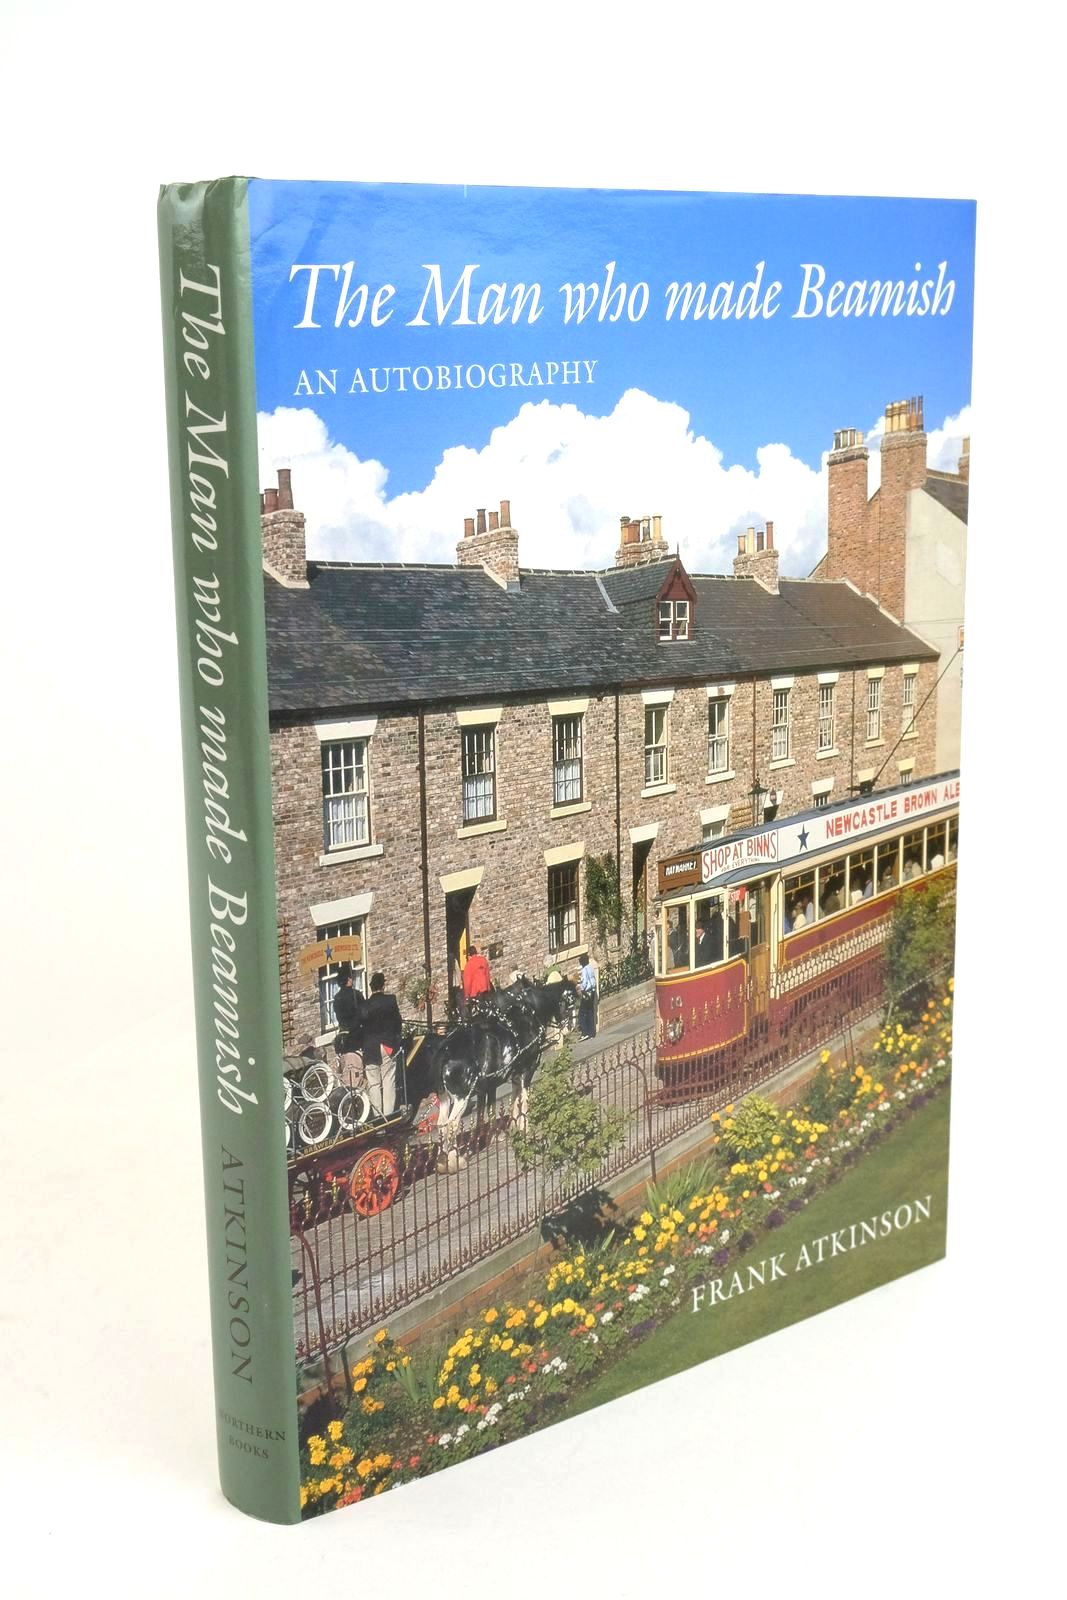 Photo of THE MAN WHO MADE BEAMISH written by Atkinson, Frank published by Northern Books (STOCK CODE: 1322450)  for sale by Stella & Rose's Books